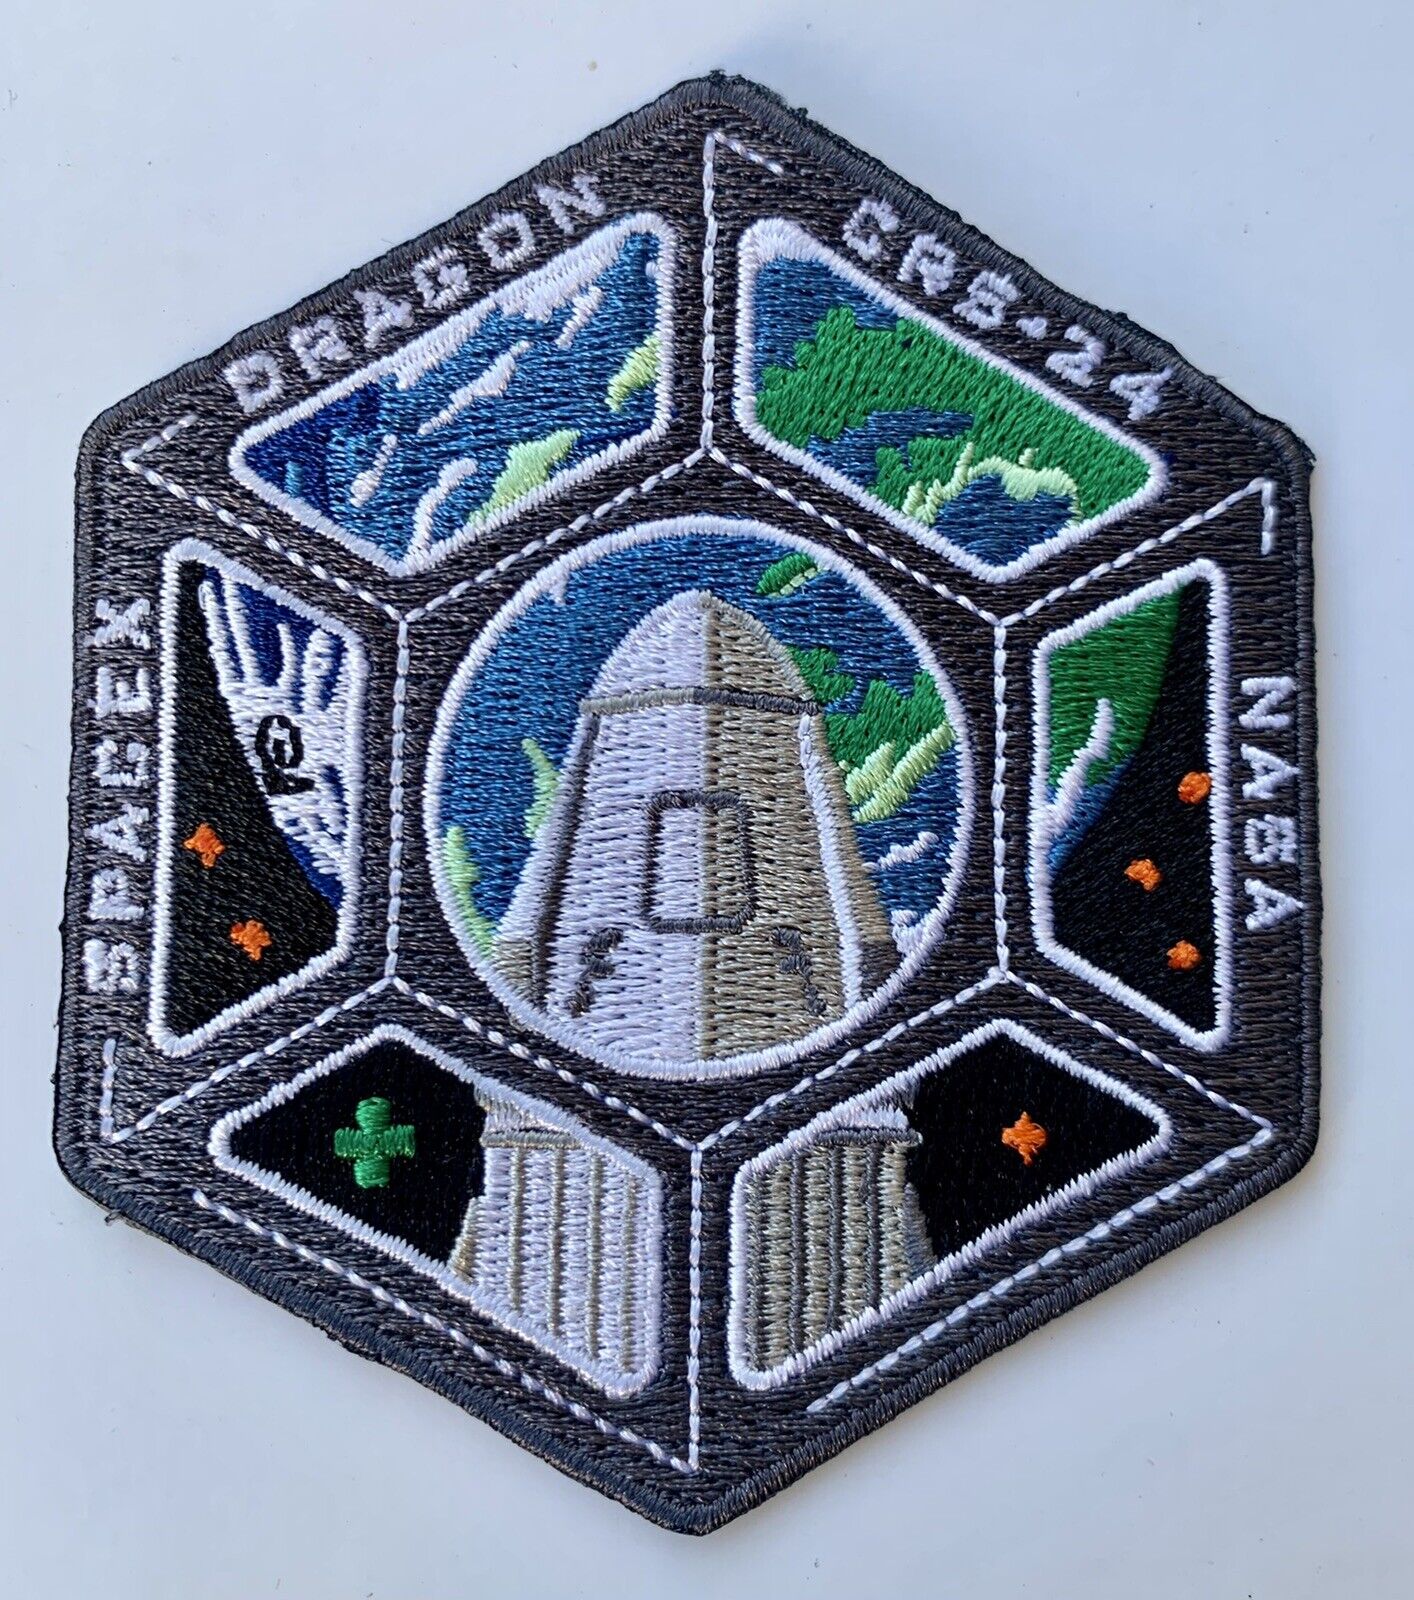 Original SPACEX CRS-24 NASA COMMERCIAL ISS RESUPPLY MISSION PATCH DRAGON RECON